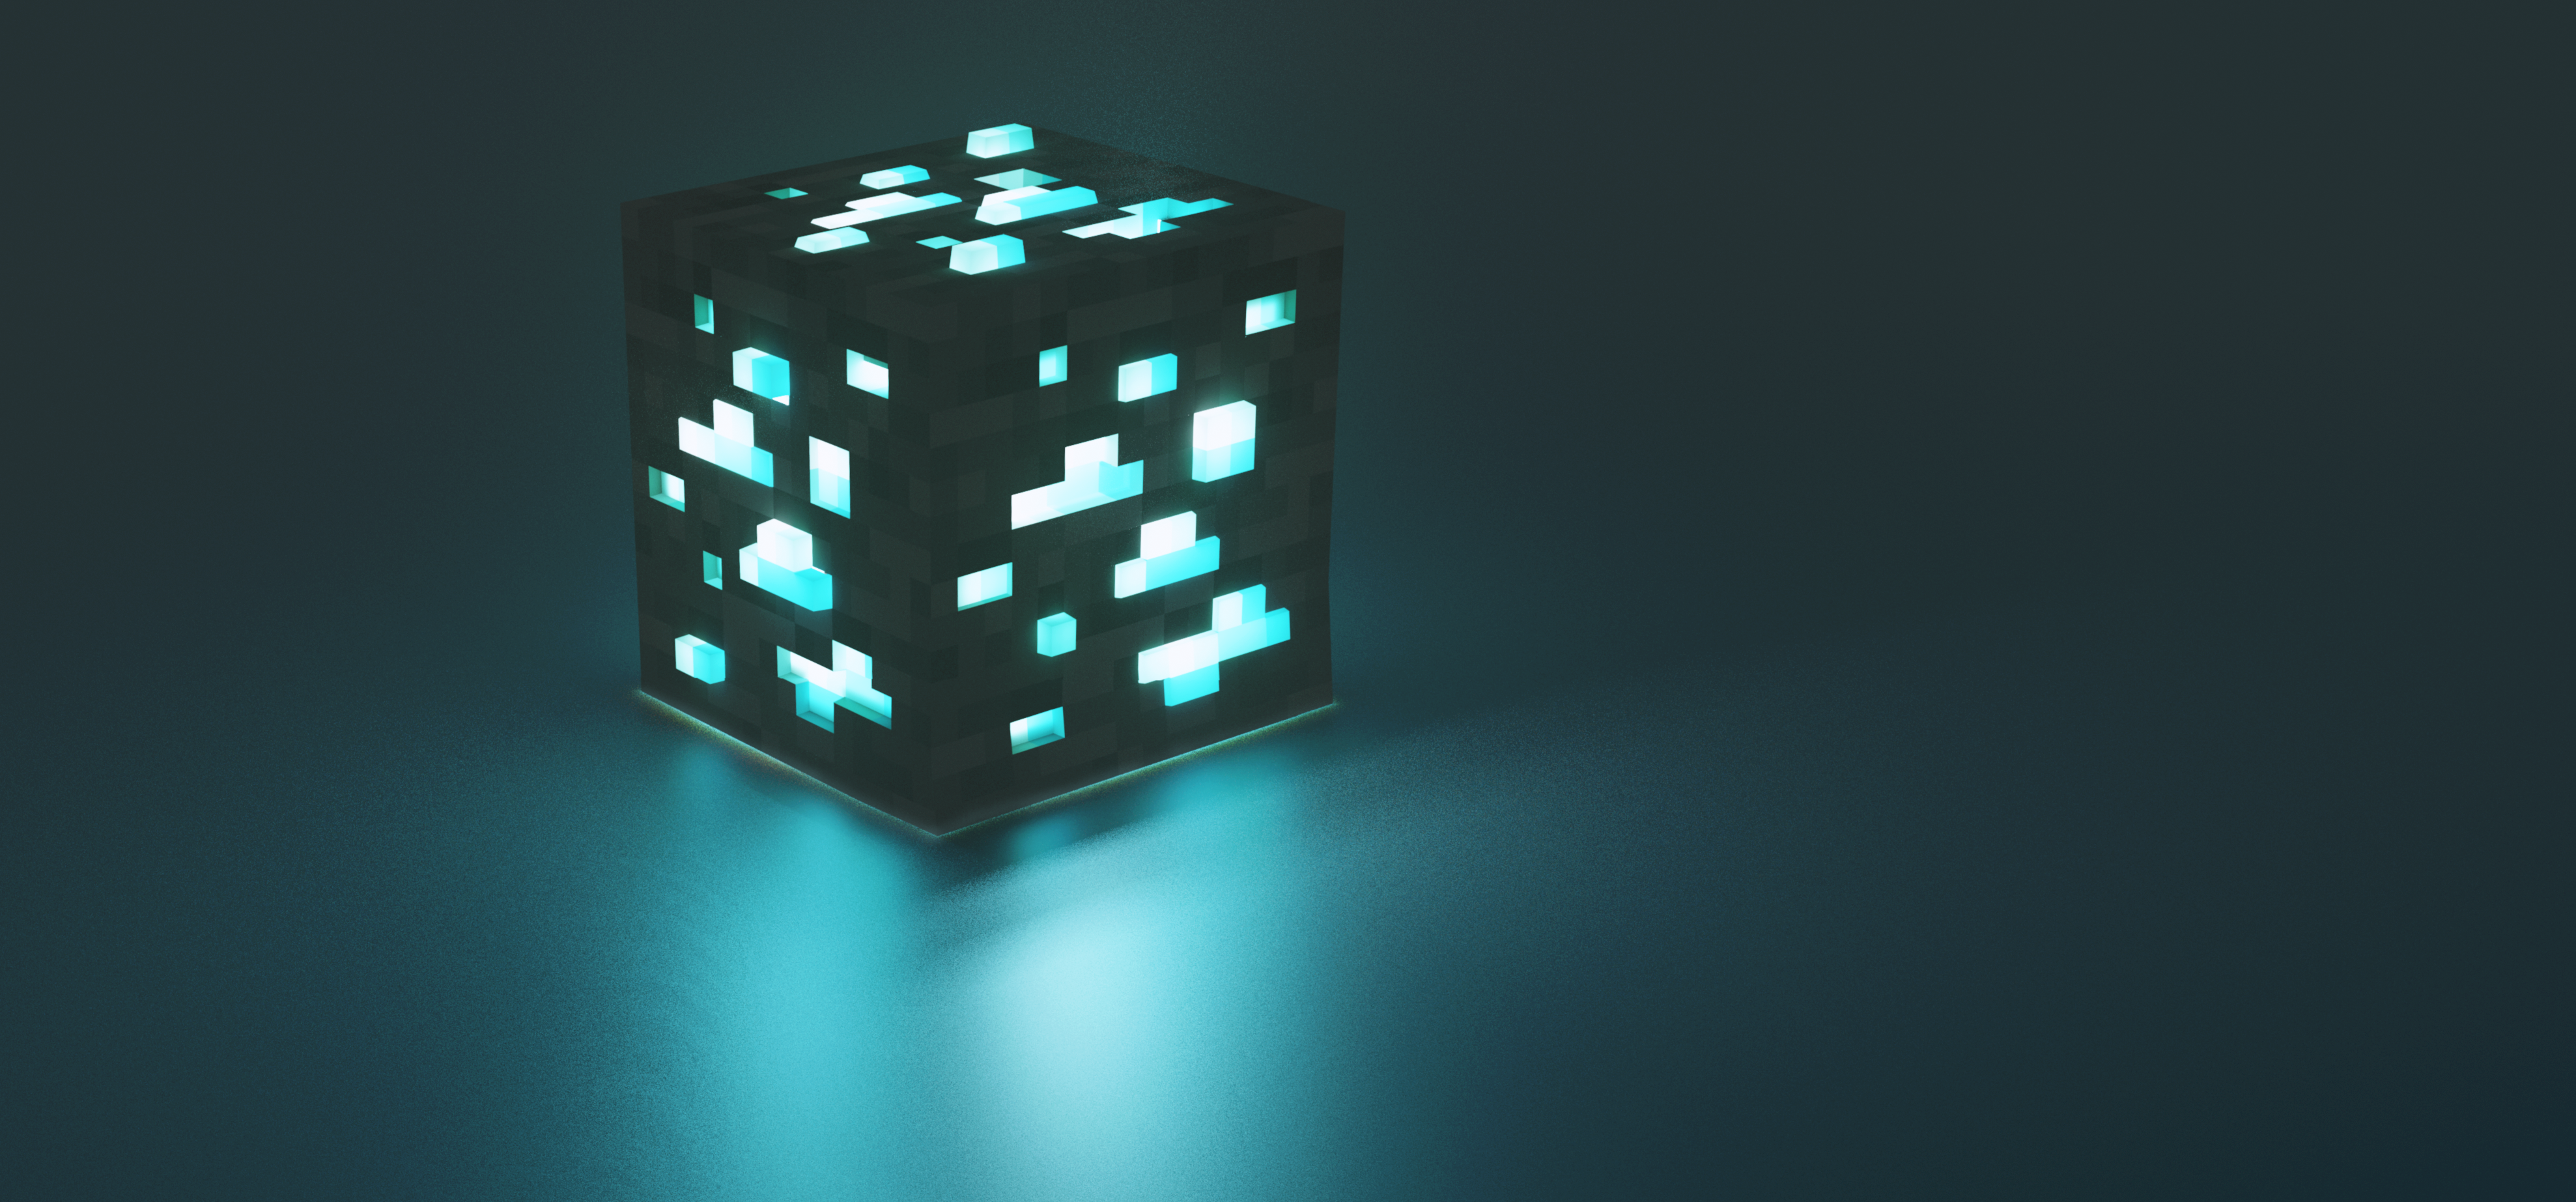 4K I made a render of a diamond block in blender! Thoughts?